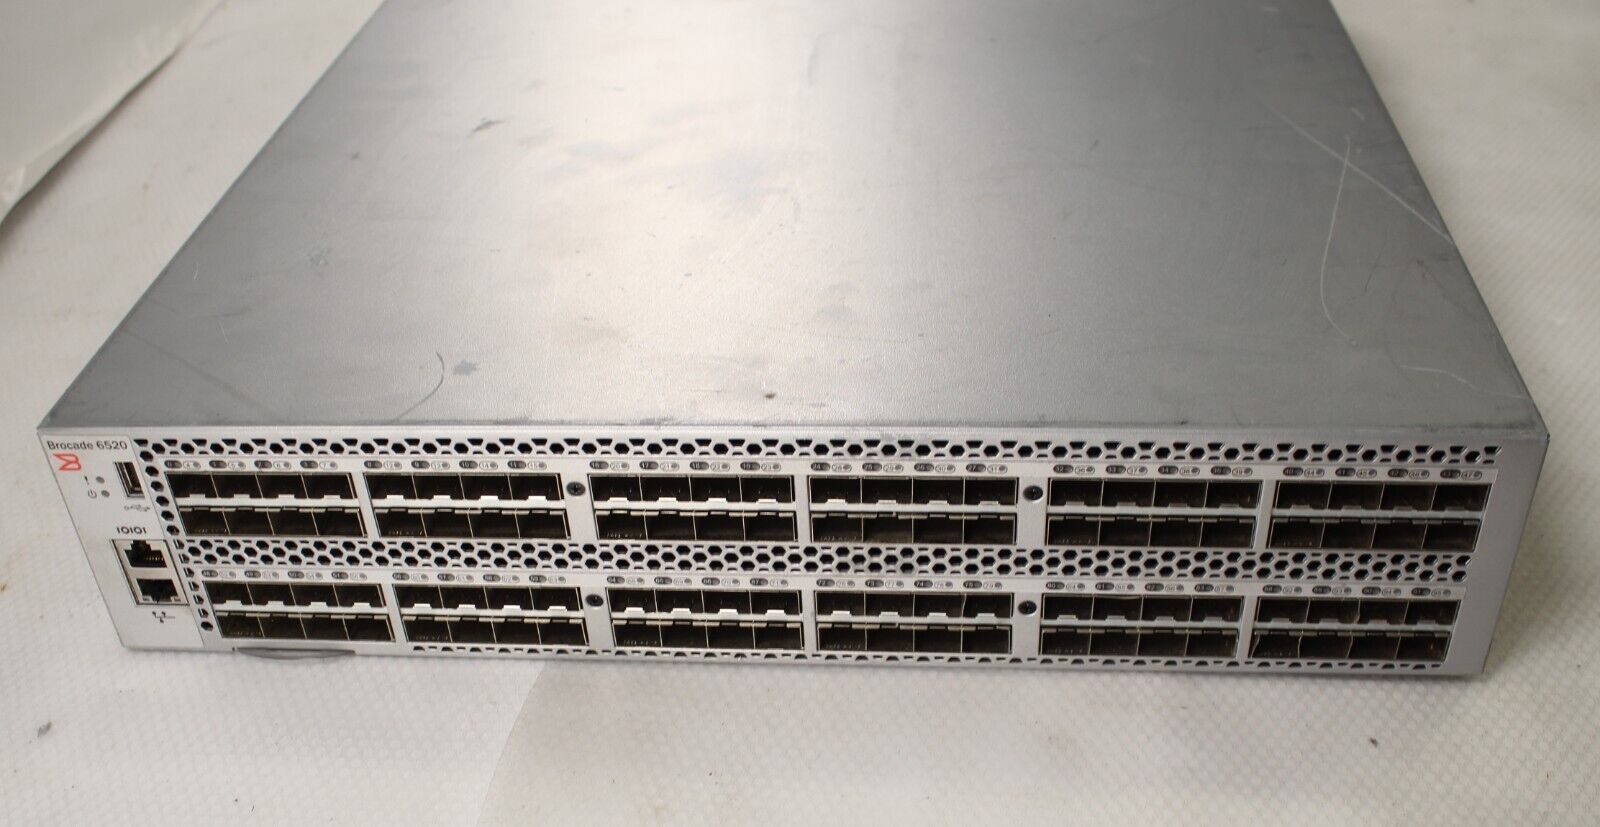 Brocade 6520 BR-6520-48-16G-R 48 Active Licensed ports Channel Switch No PSUs